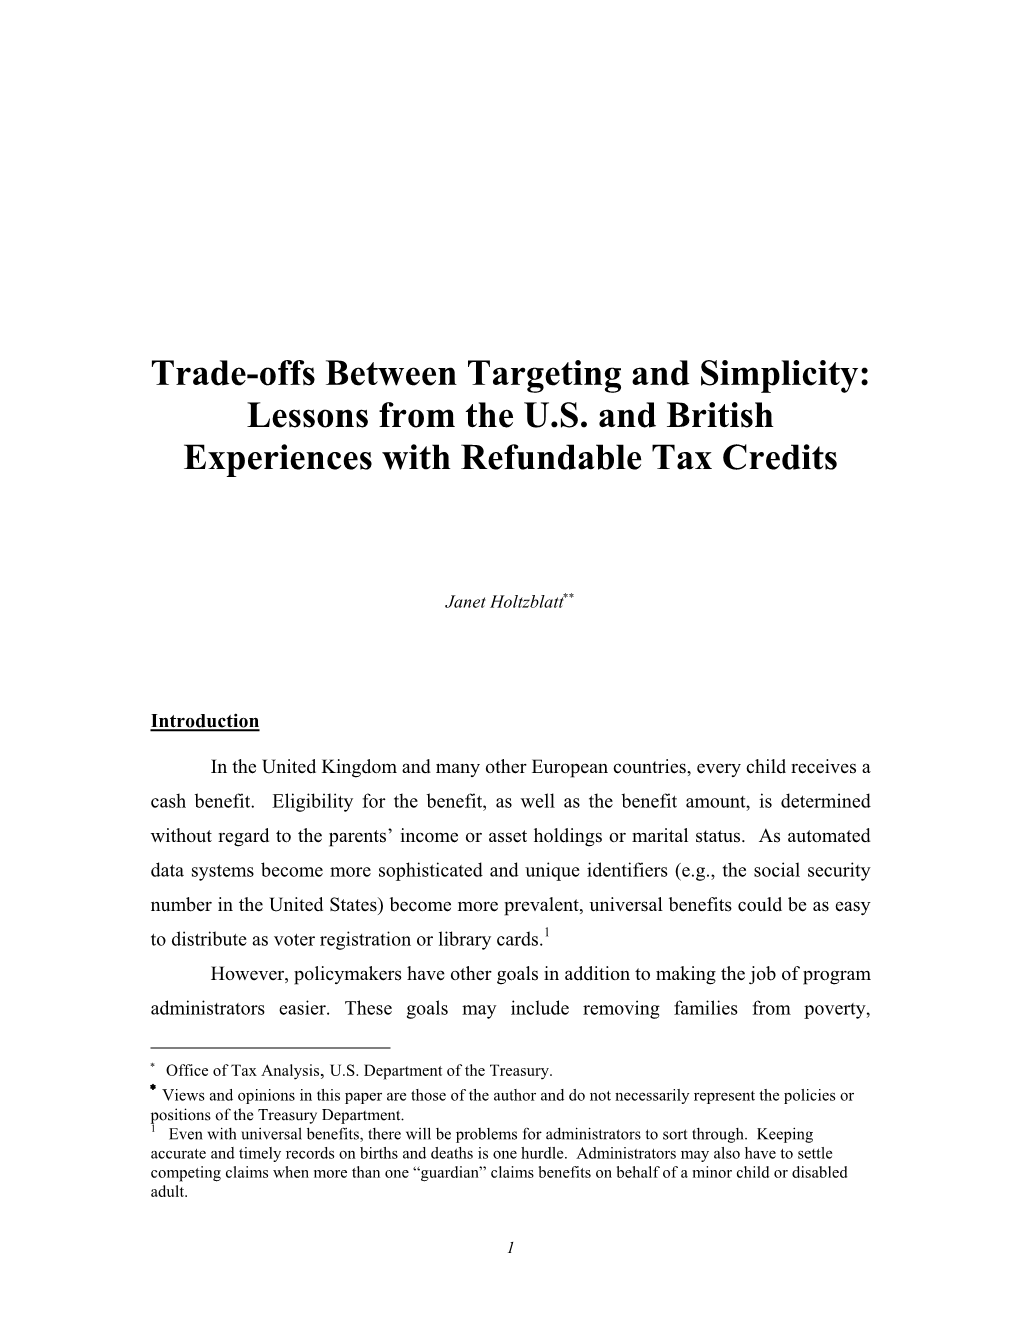 Trade-Offs Between Targeting and Simplicity: Lessons from the U.S. and British Experiences with Refundable Tax Credits